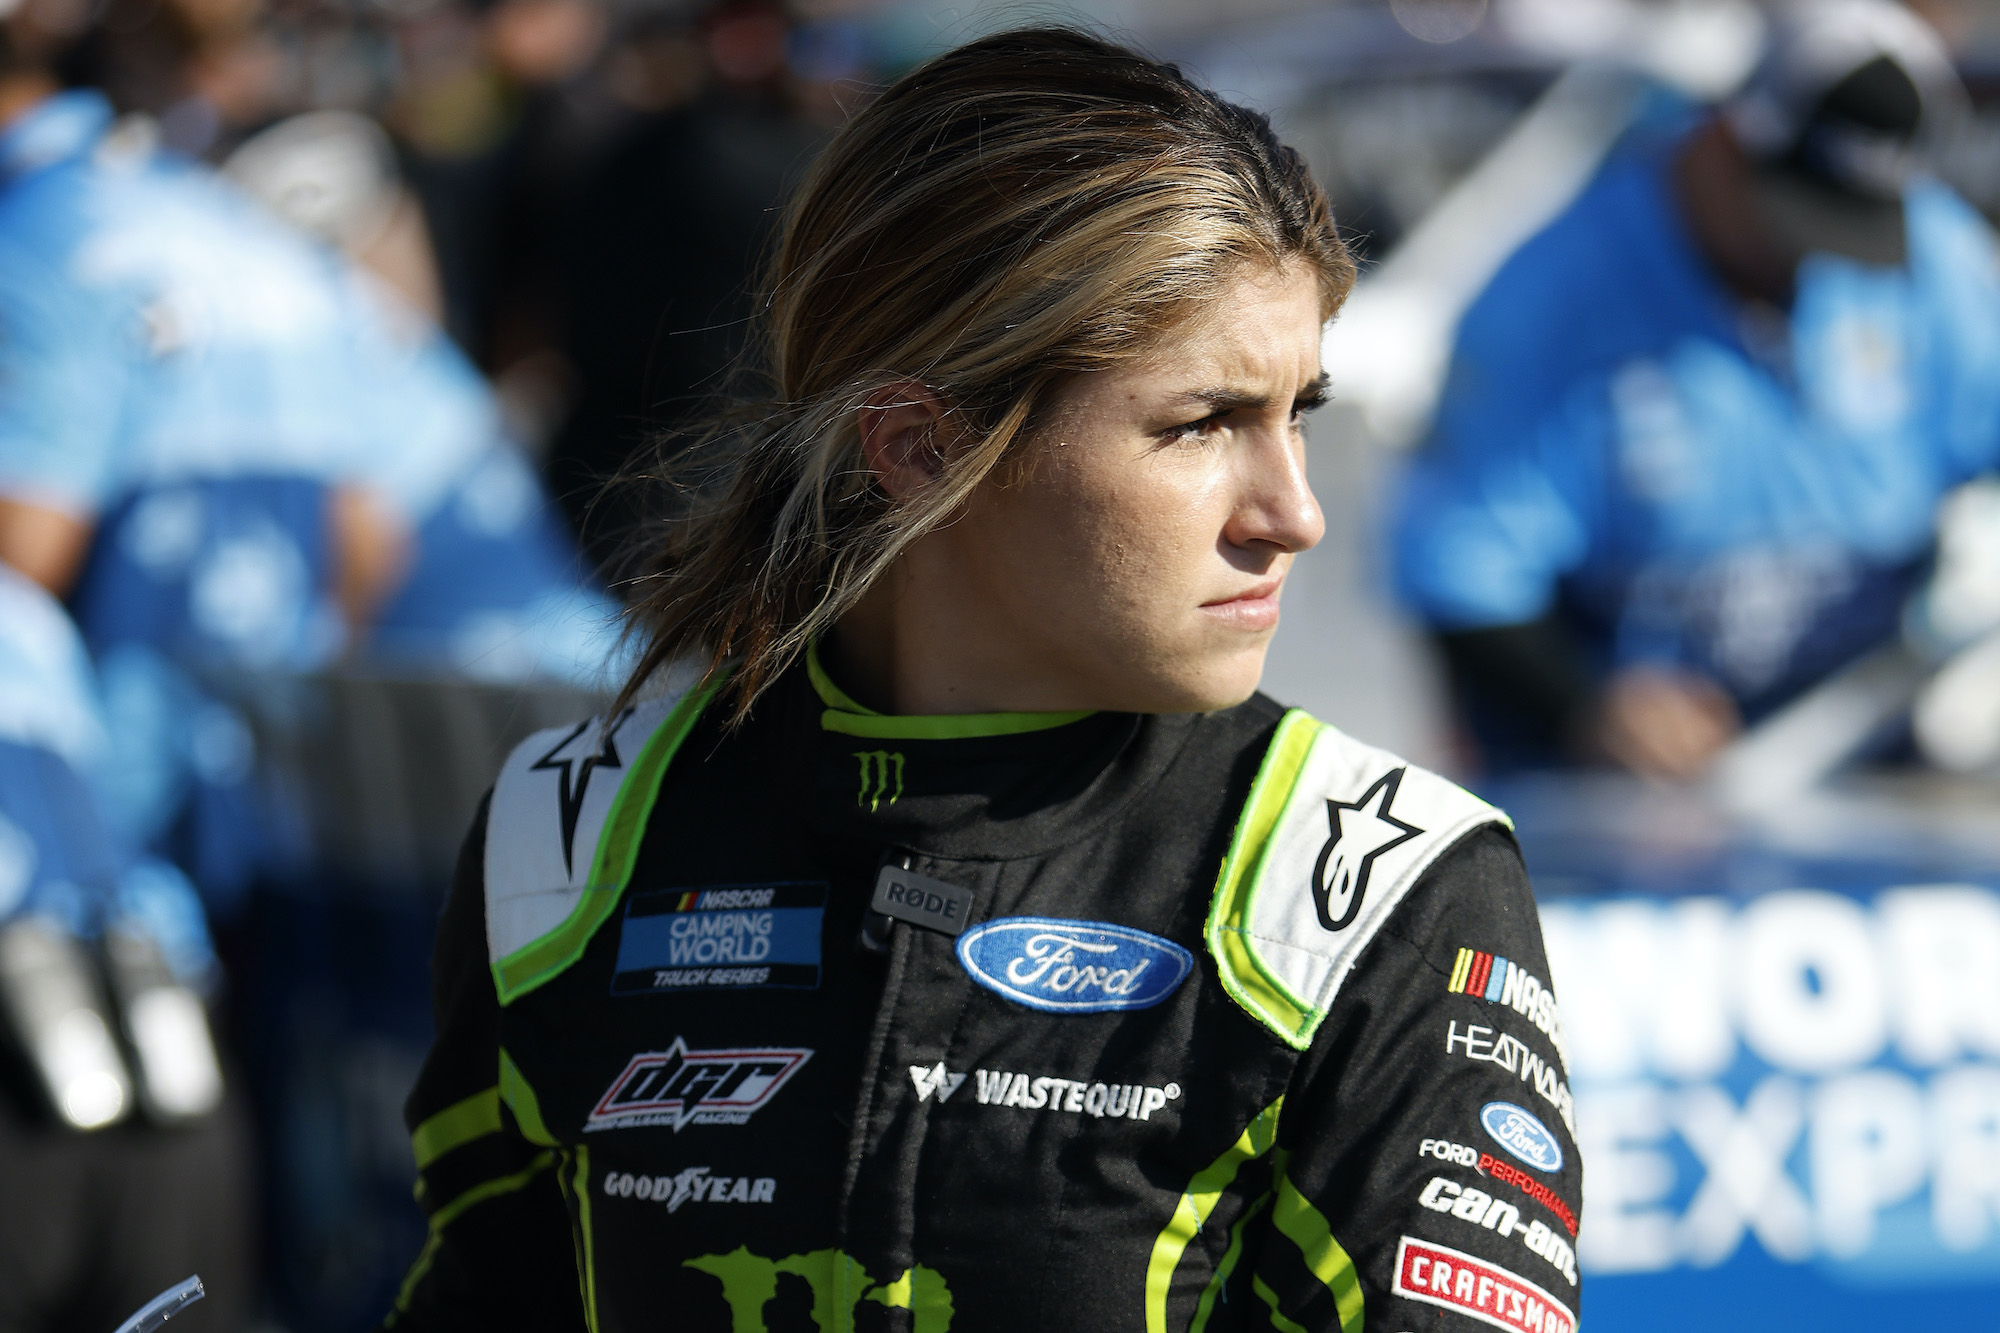 Hailie Deegan Better Back Up Her Latest Words, or Her Career Will Be Short-Lived